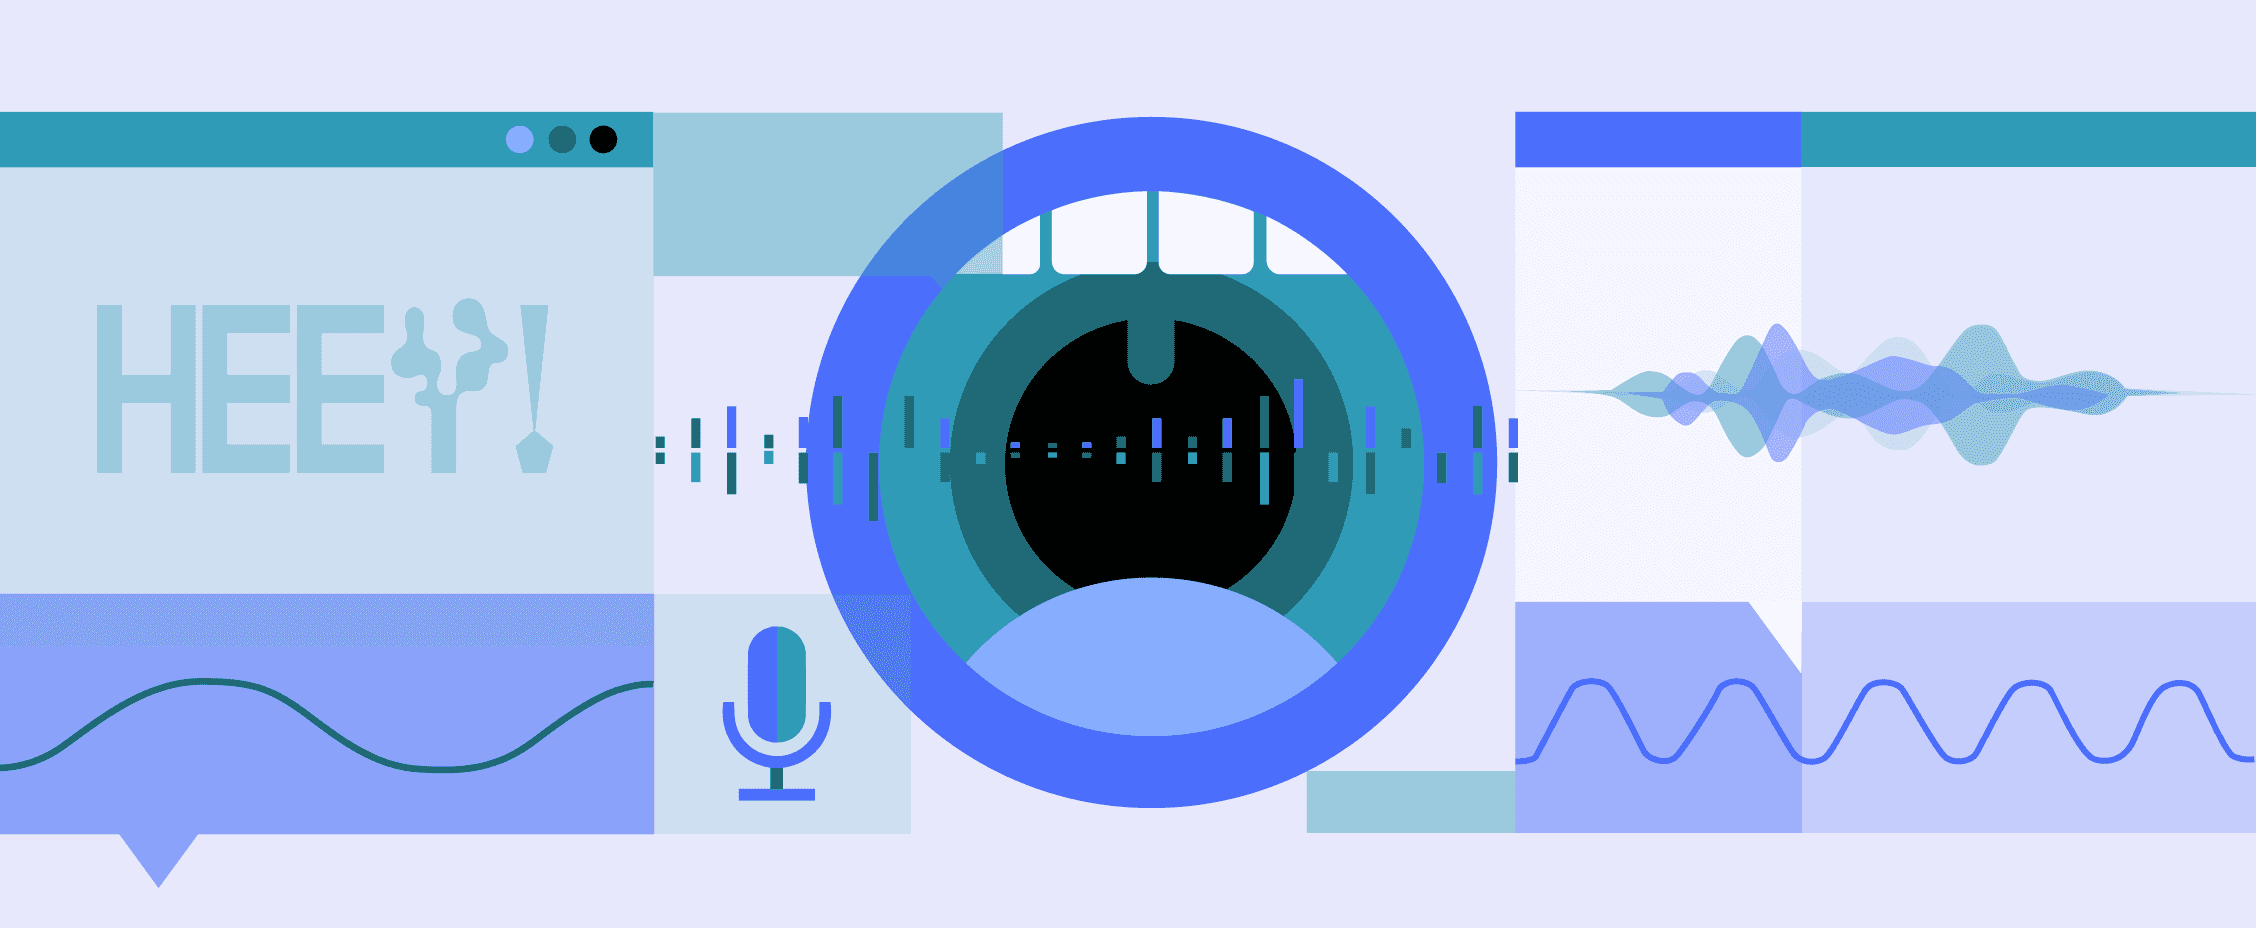 Voice - Our New Interface for Everything?